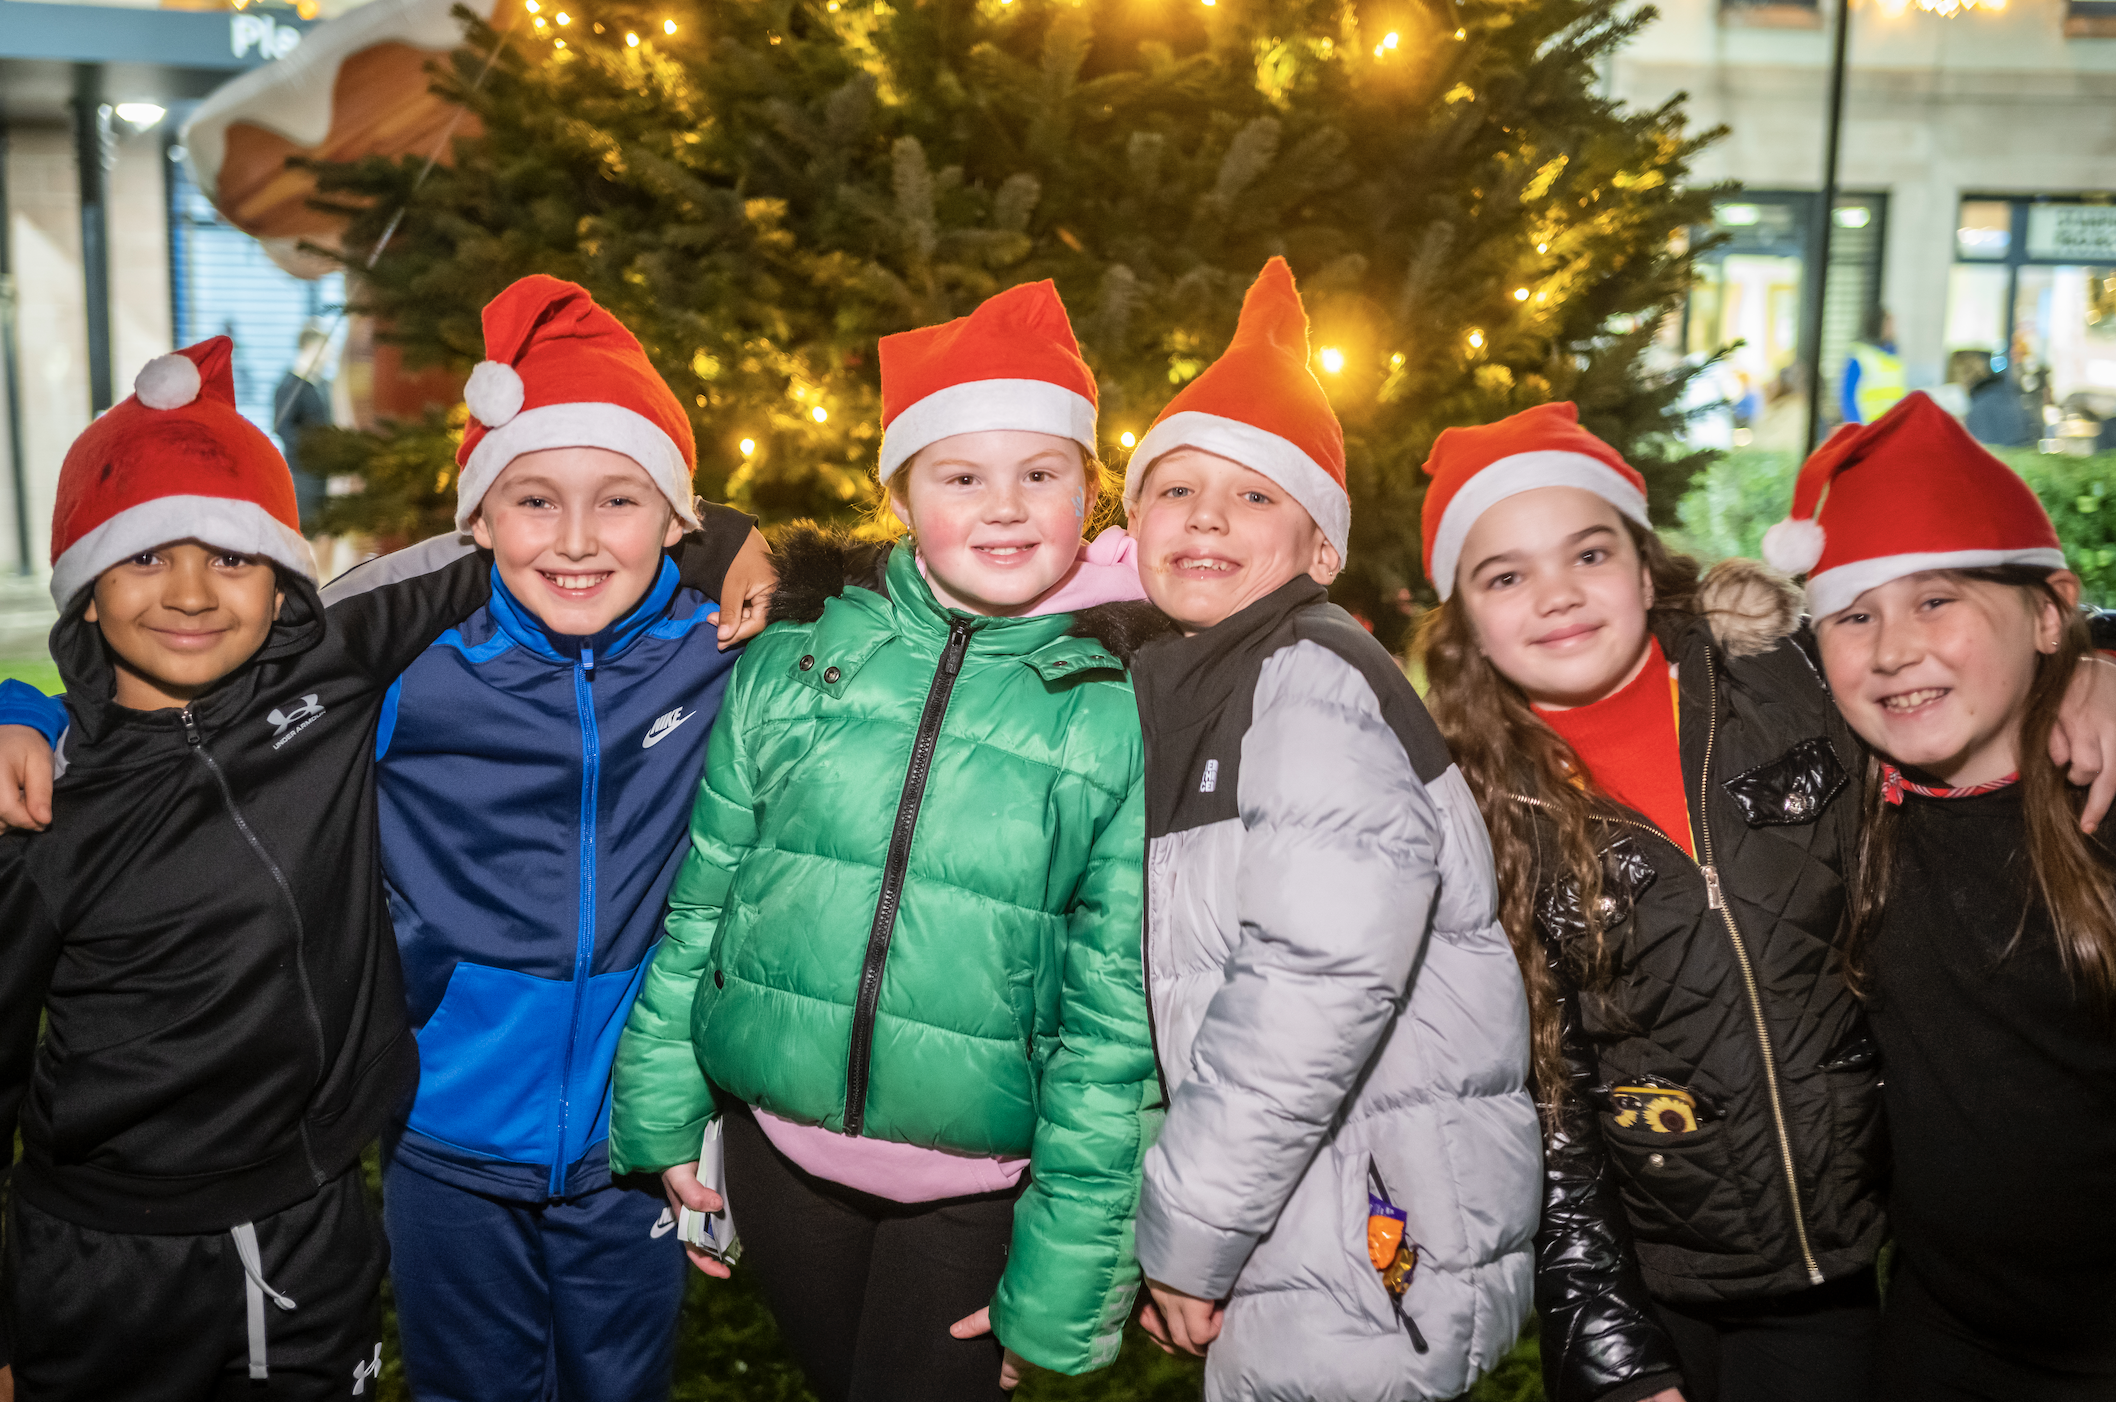 Places for People Scotland kicks off Christmas in Craigmillar